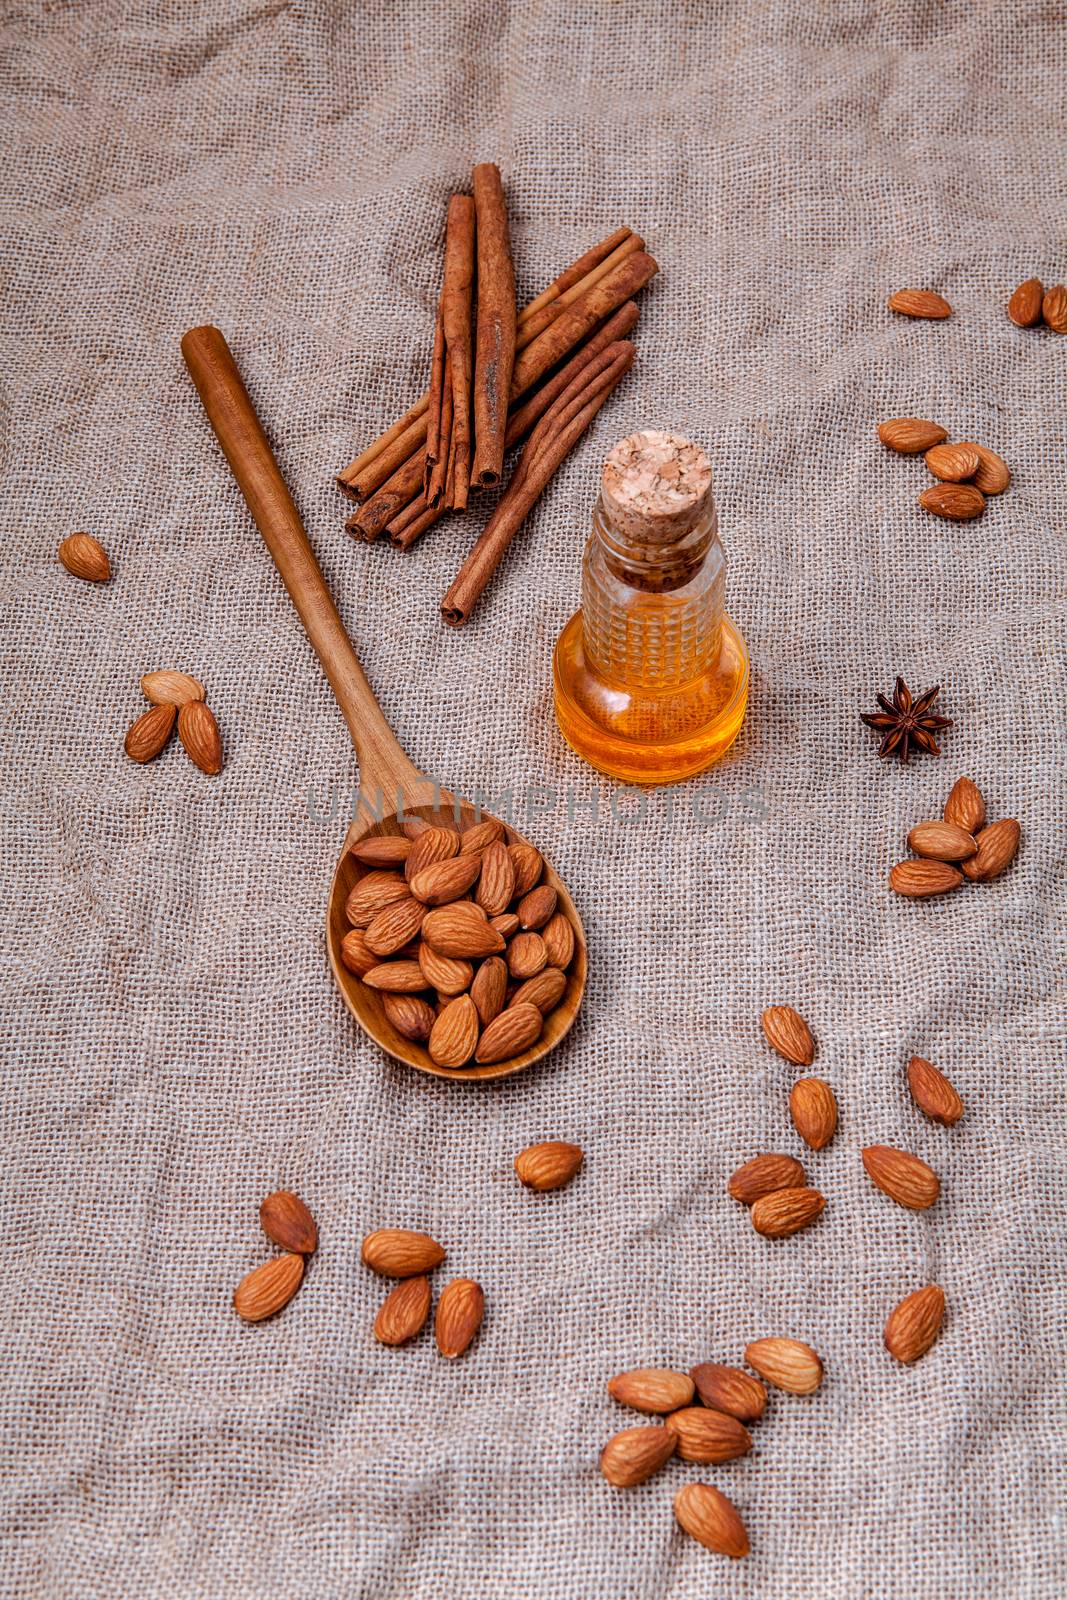 Bottle of extra virgin almonds oil with whole almonds and cinnam by kerdkanno